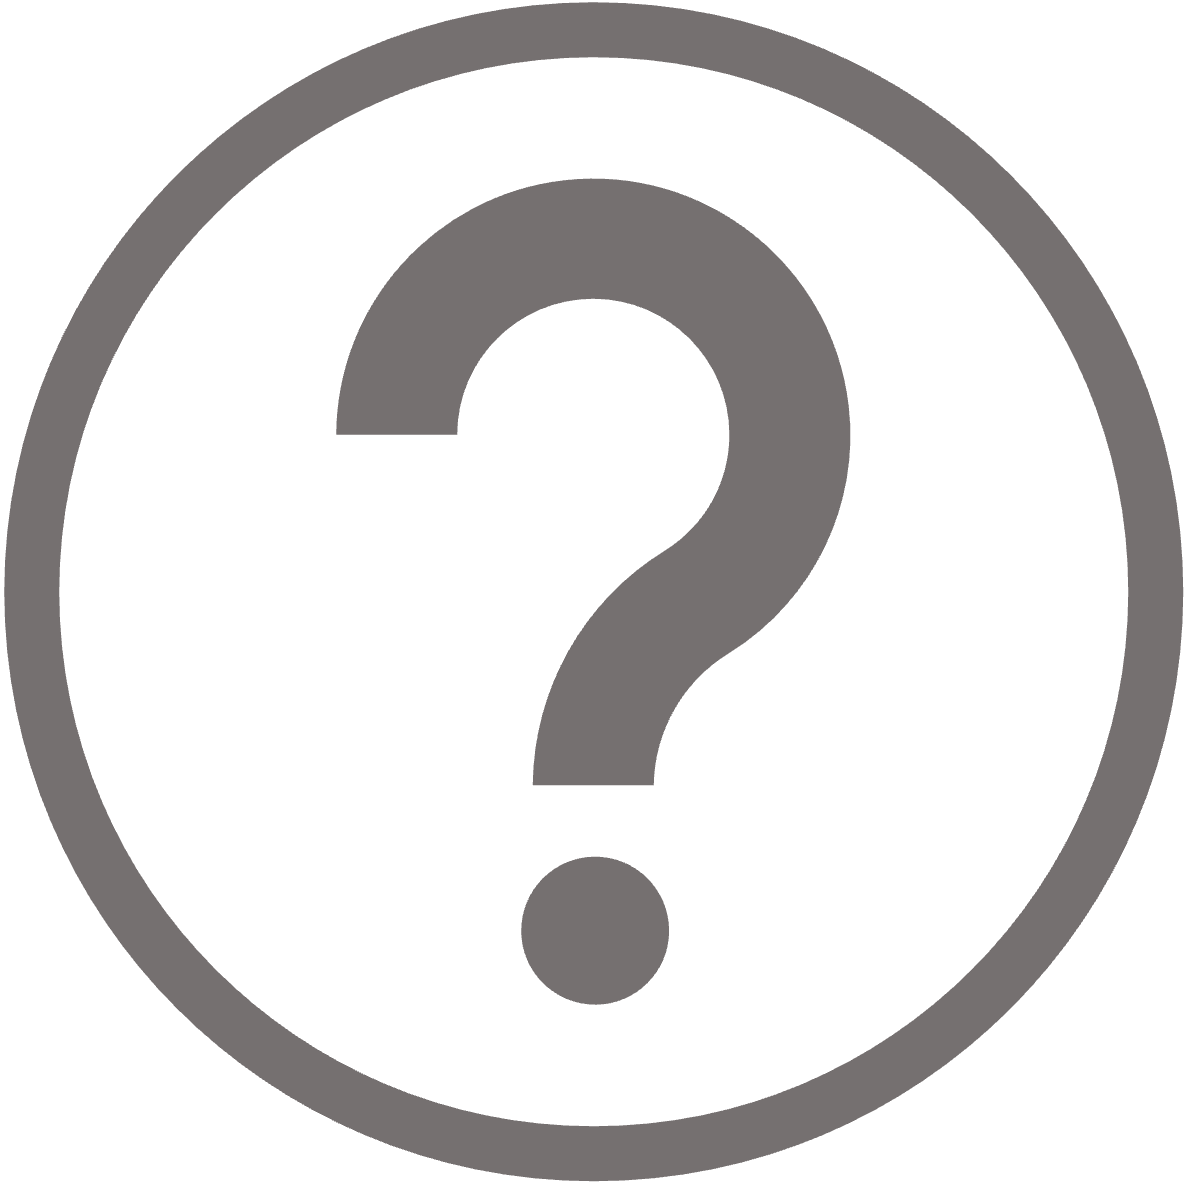 Icon of question mark inside a circle